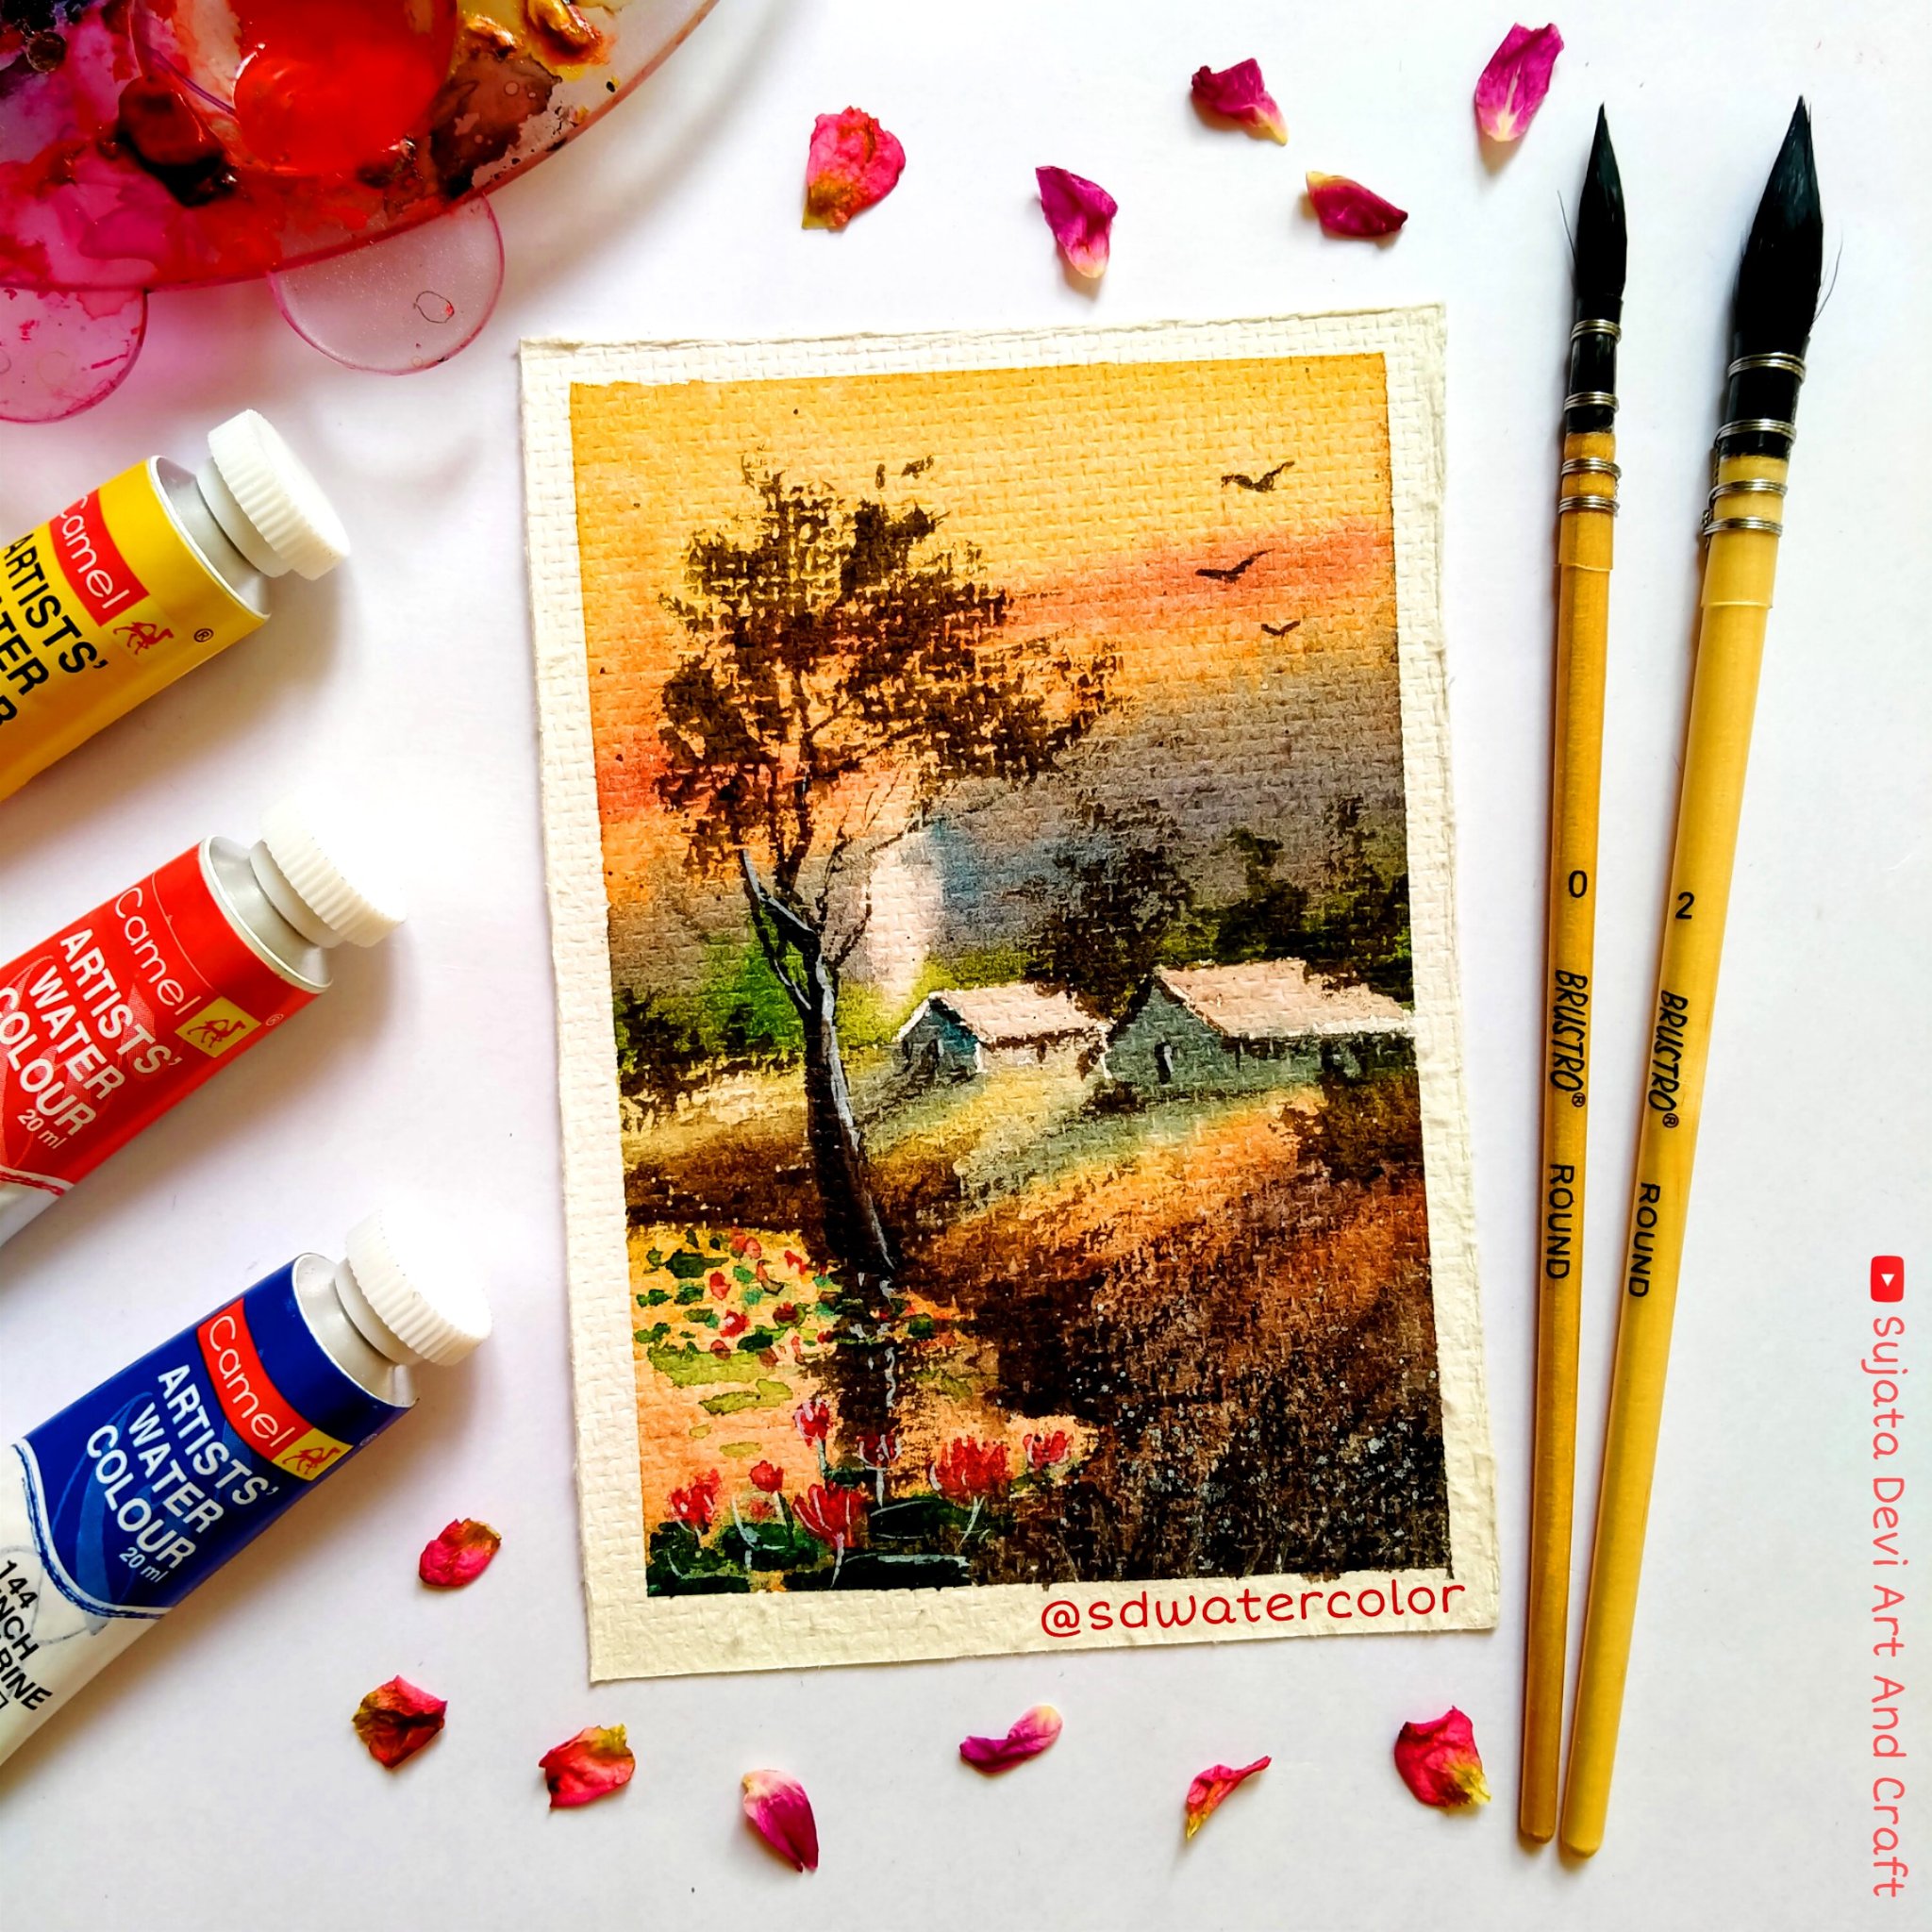 WATERCOLOR PAINTING ON HANDMADE PAPER 